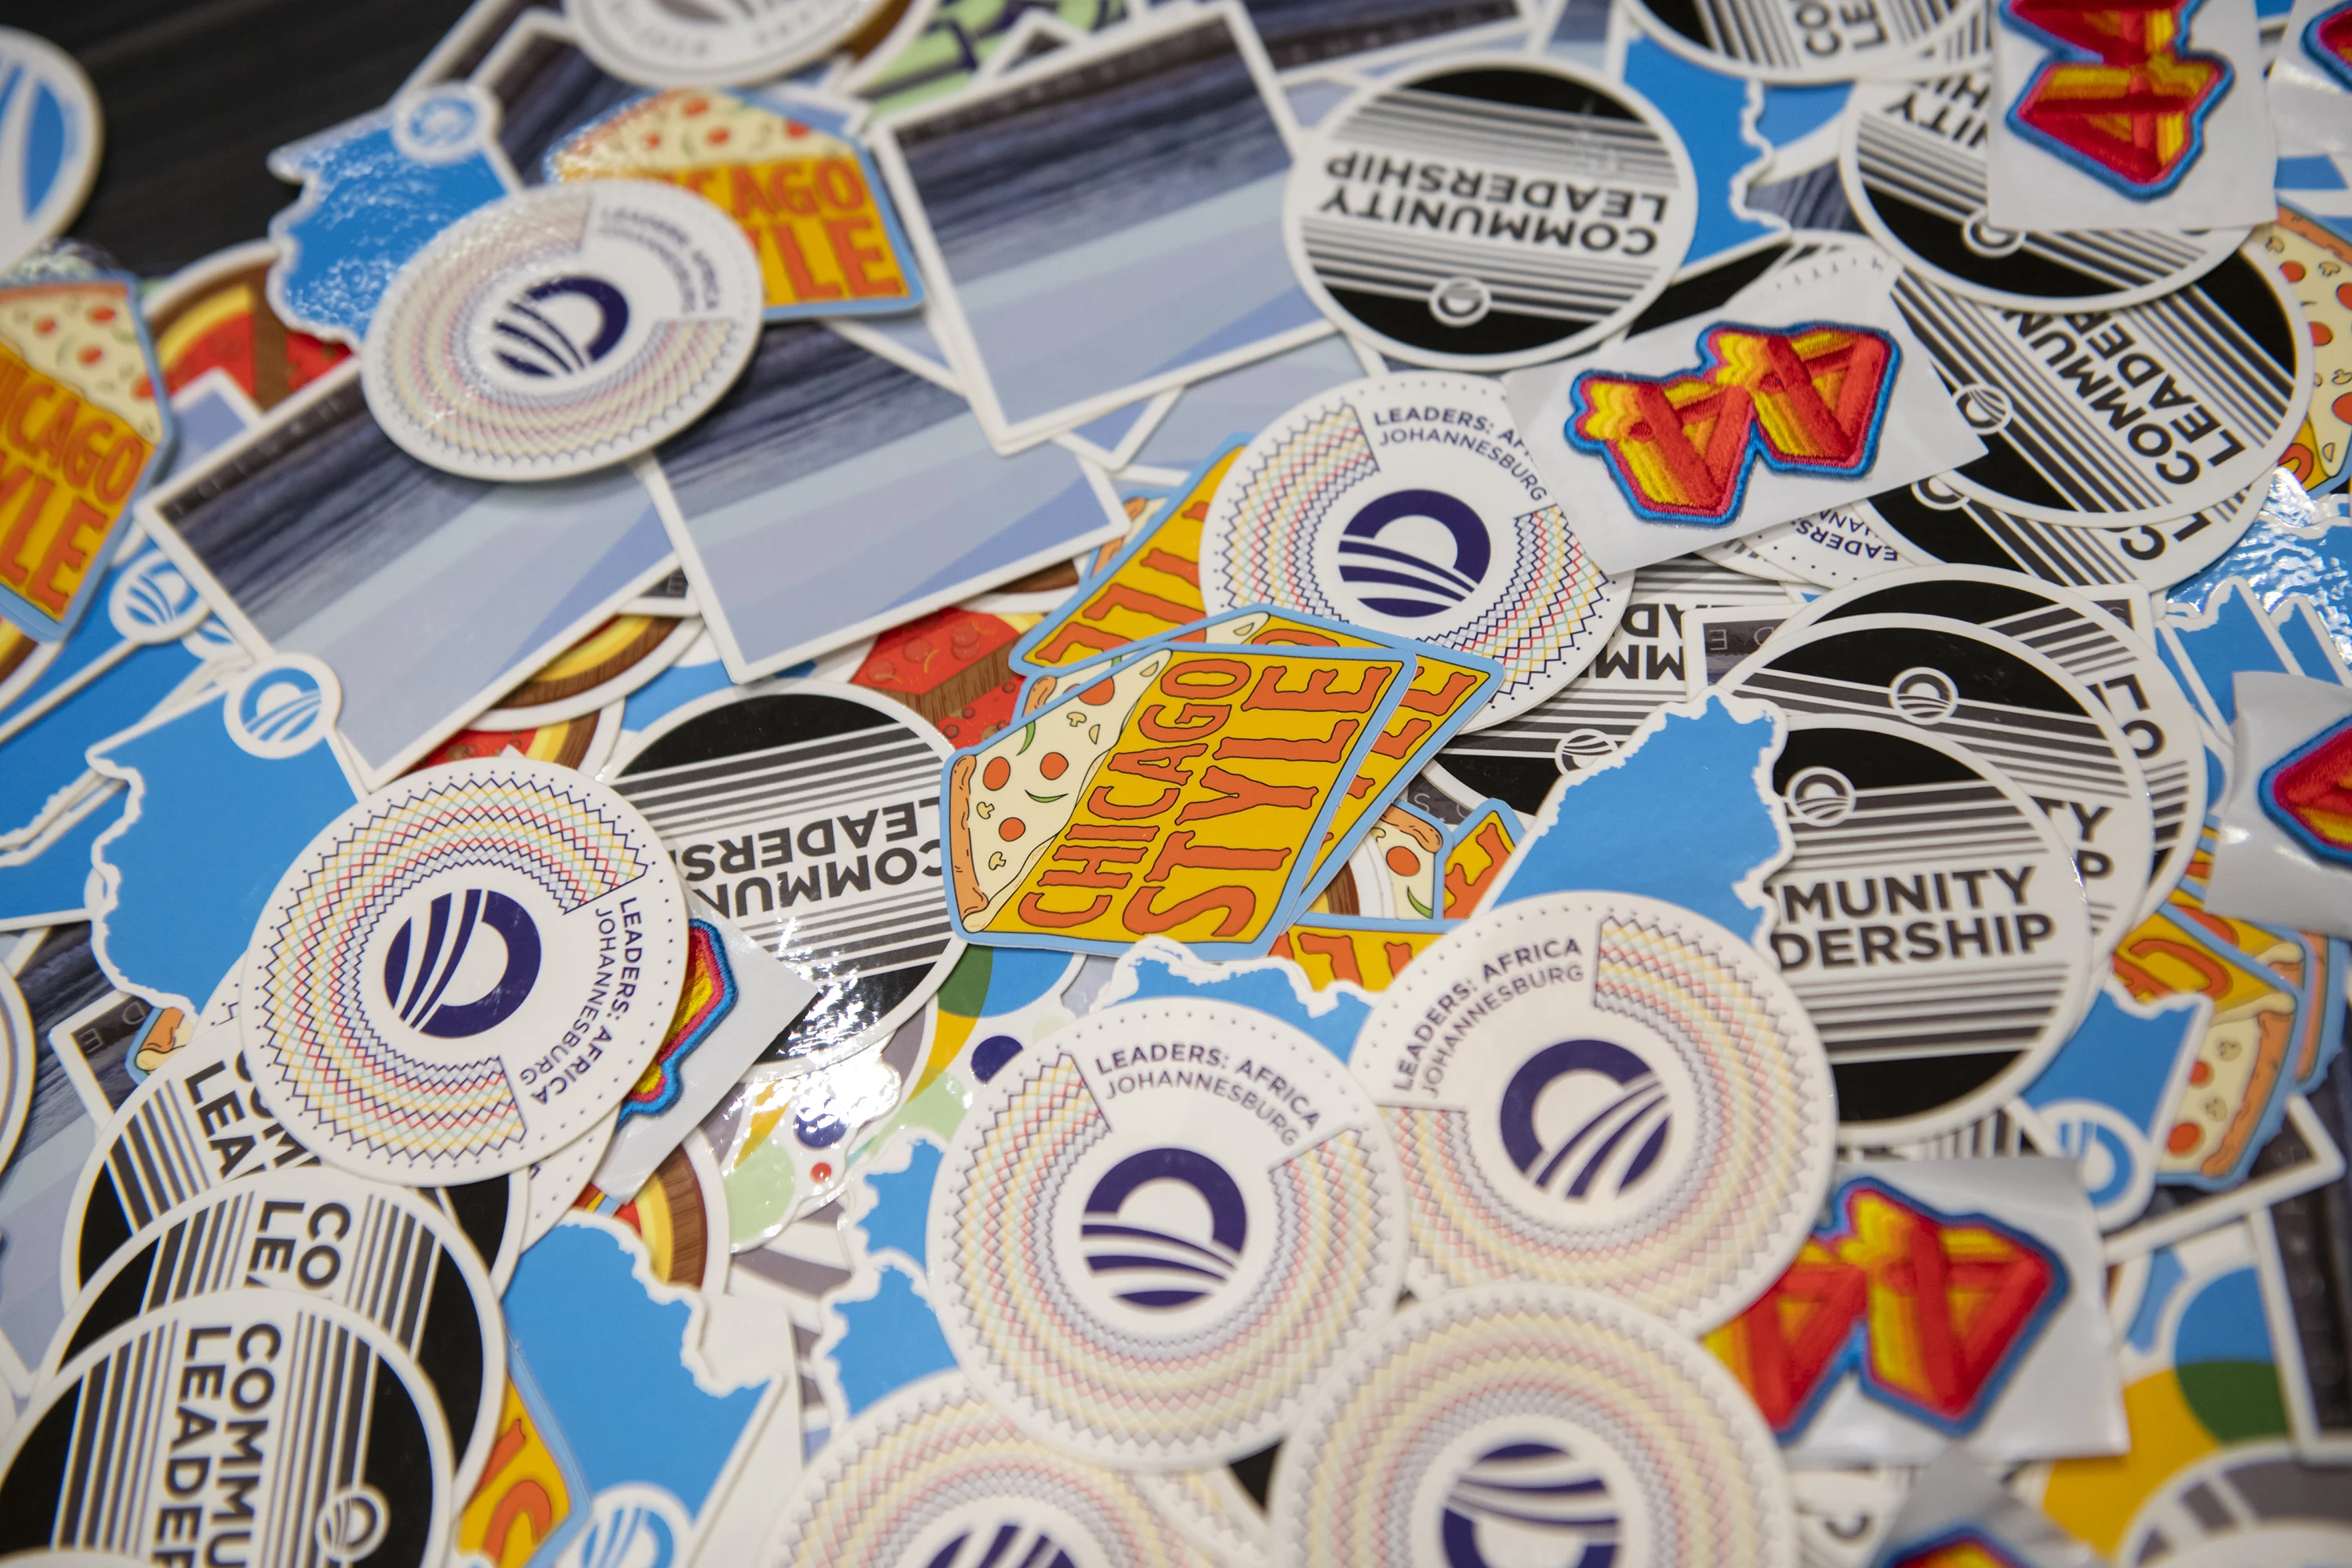 A close-up of a pile of colorful stickers. They say Community Leaders," "Chicago Style," "Leaders Africa: Johannesburg" and more.  